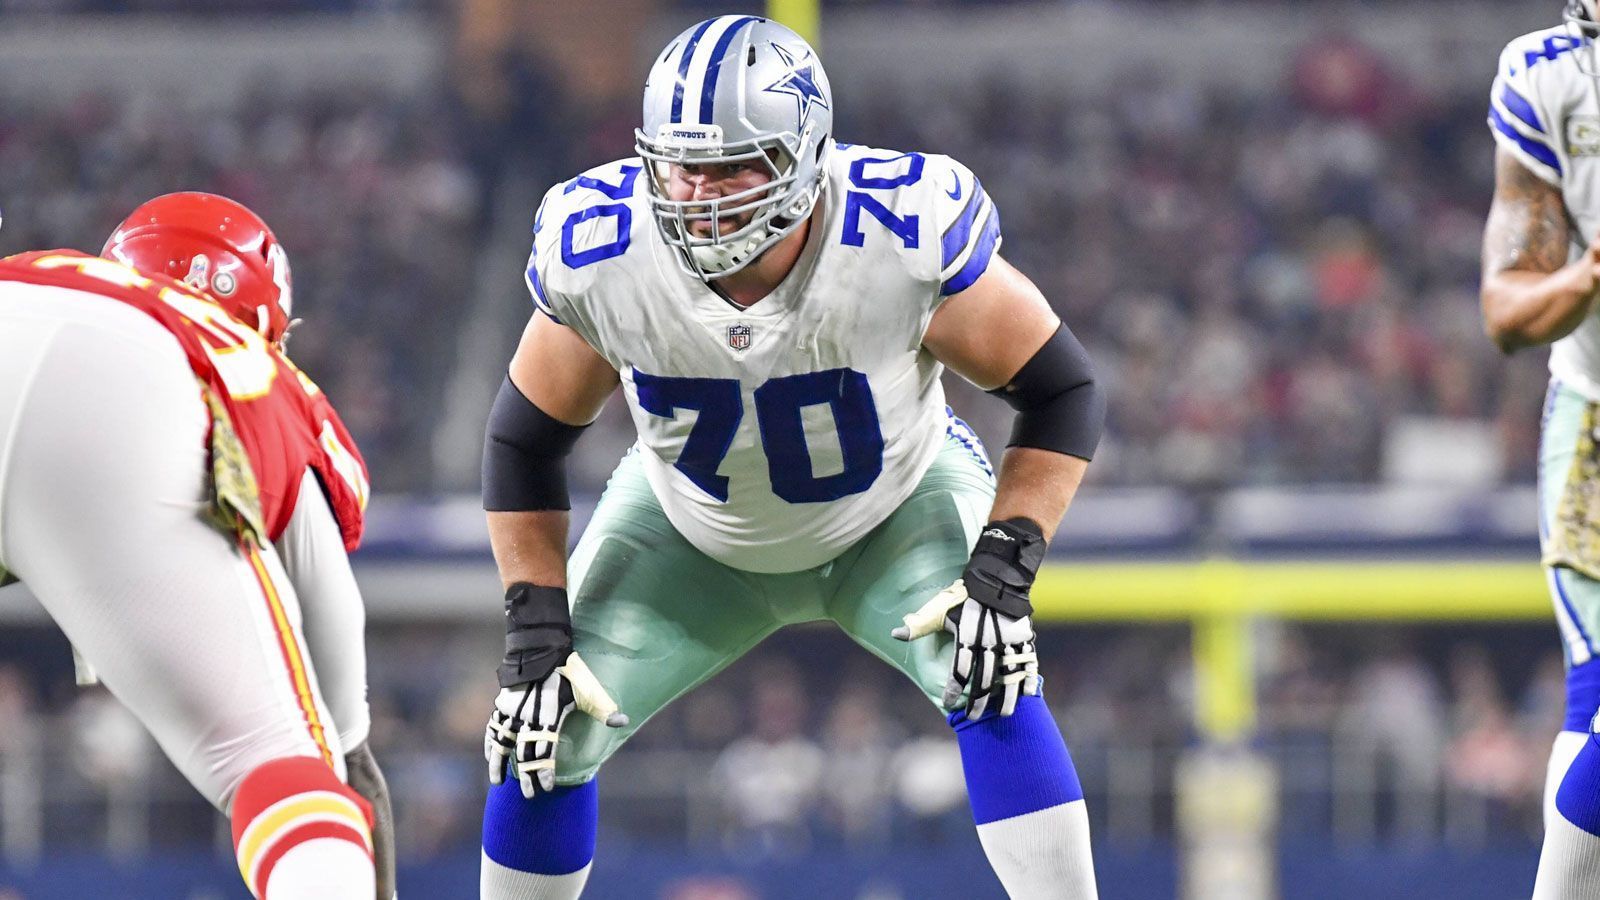 <strong>70: Zack Martin</strong><br>Team: Dallas Cowboys<br>Position: Offensive Guard<br>Erfolge: sechsmaliger First Team All-Pro, achtmaliger Pro Bowler<br>Honorable Mention: Sam Huff